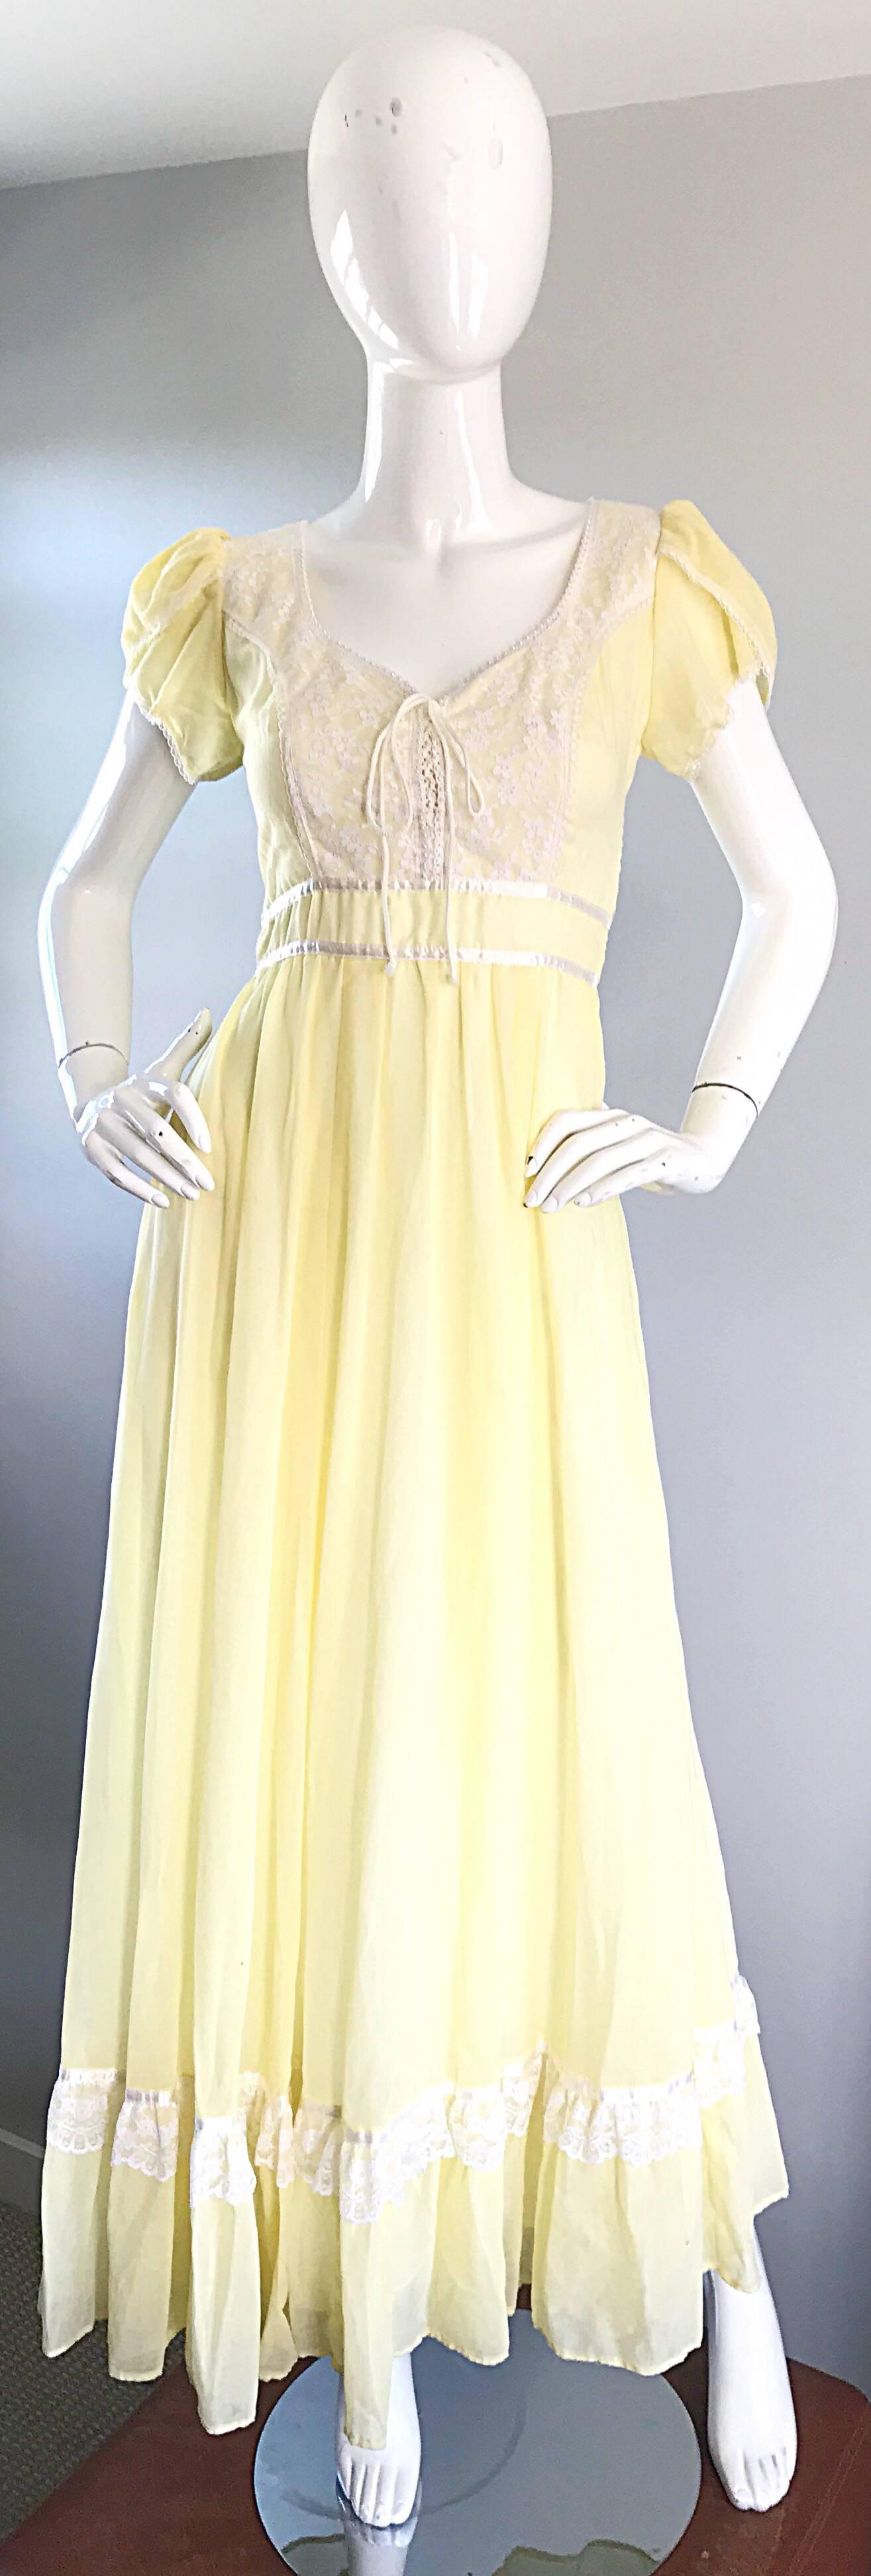 1970s Pale Yellow White Cotton Voile Pearl Encrusted Vintage 70s Boho Maxi Dress 5